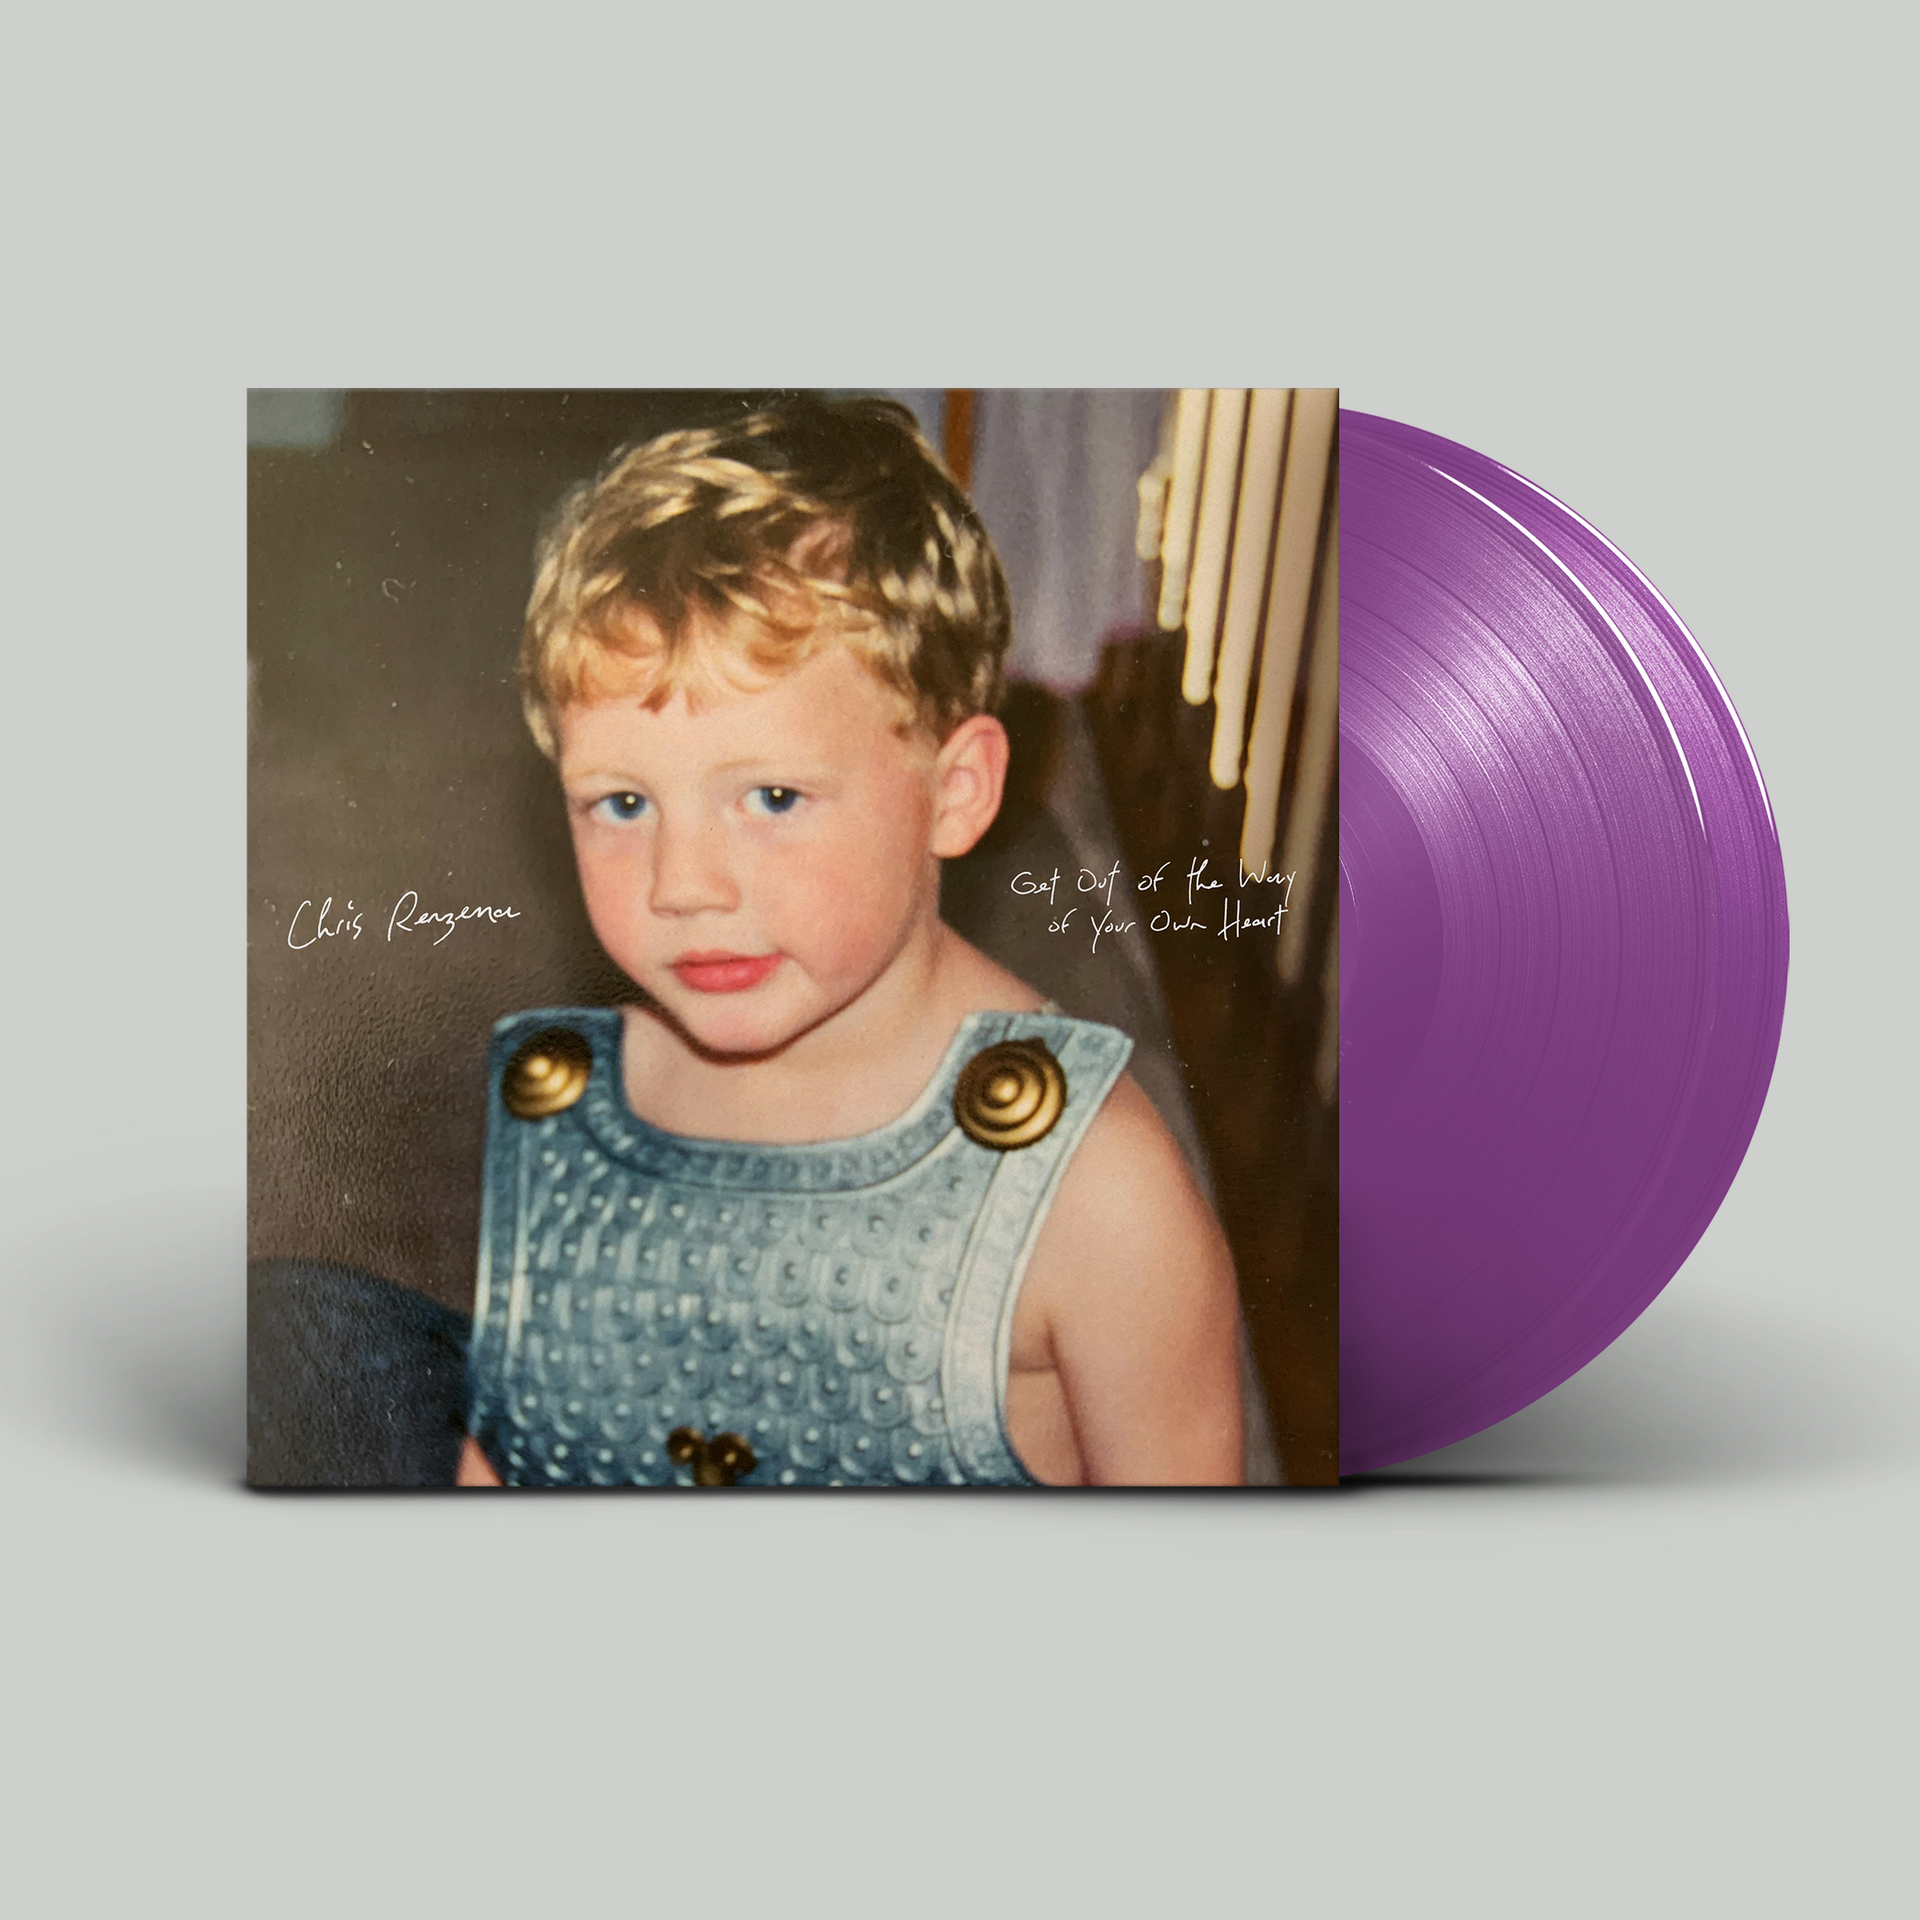 Chris Renzema: Get Out Of The Way Of Your Own Heart Vinyl LP (Purple)